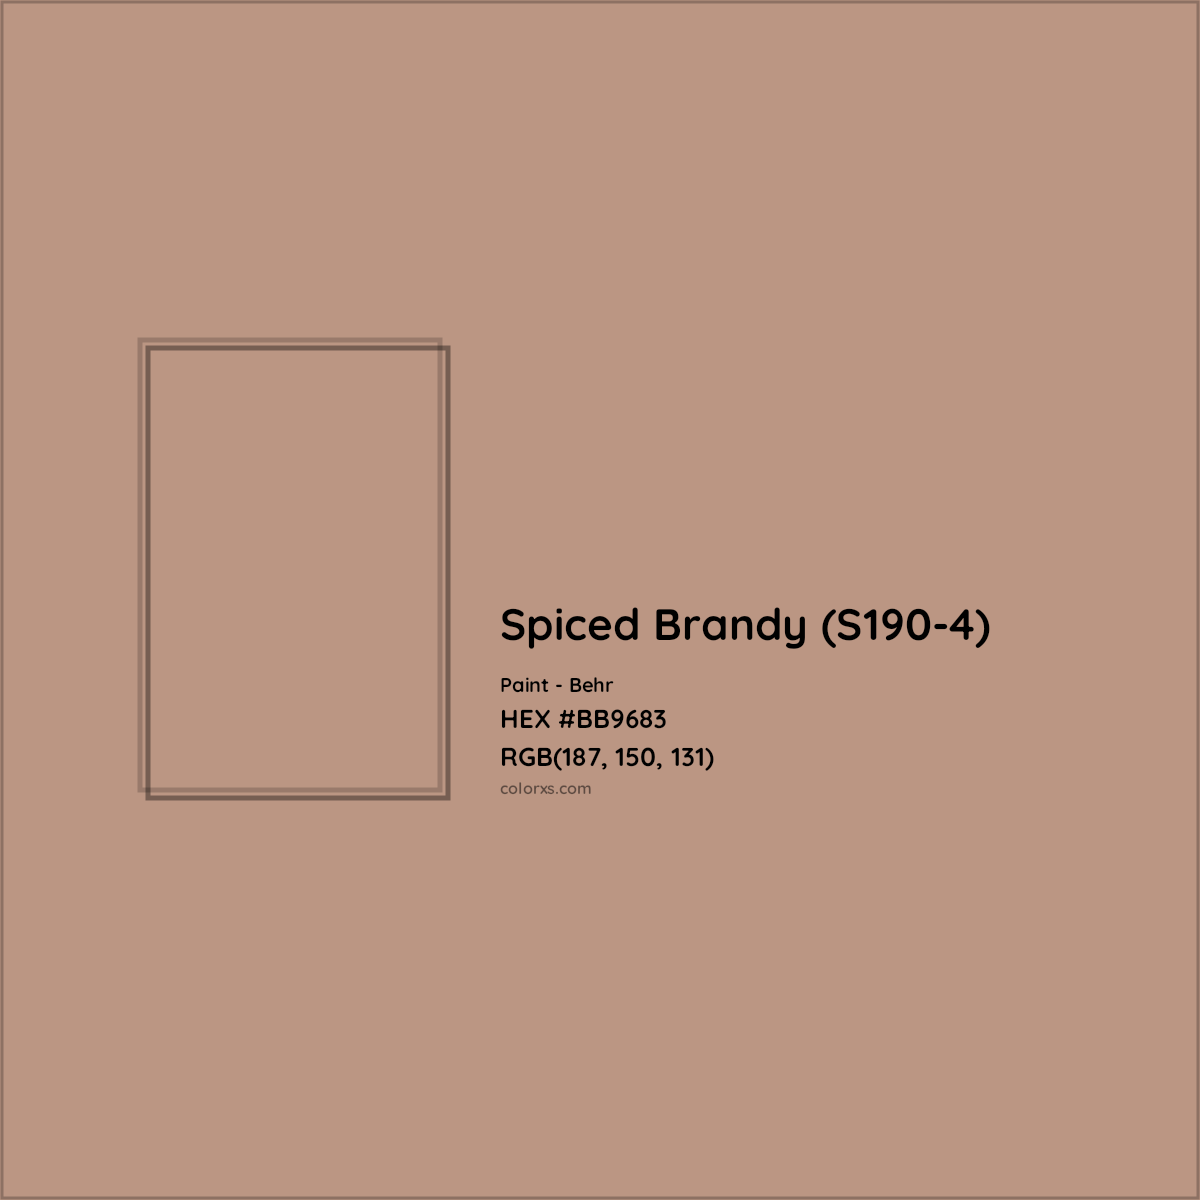 HEX #BB9683 Spiced Brandy (S190-4) Paint Behr - Color Code